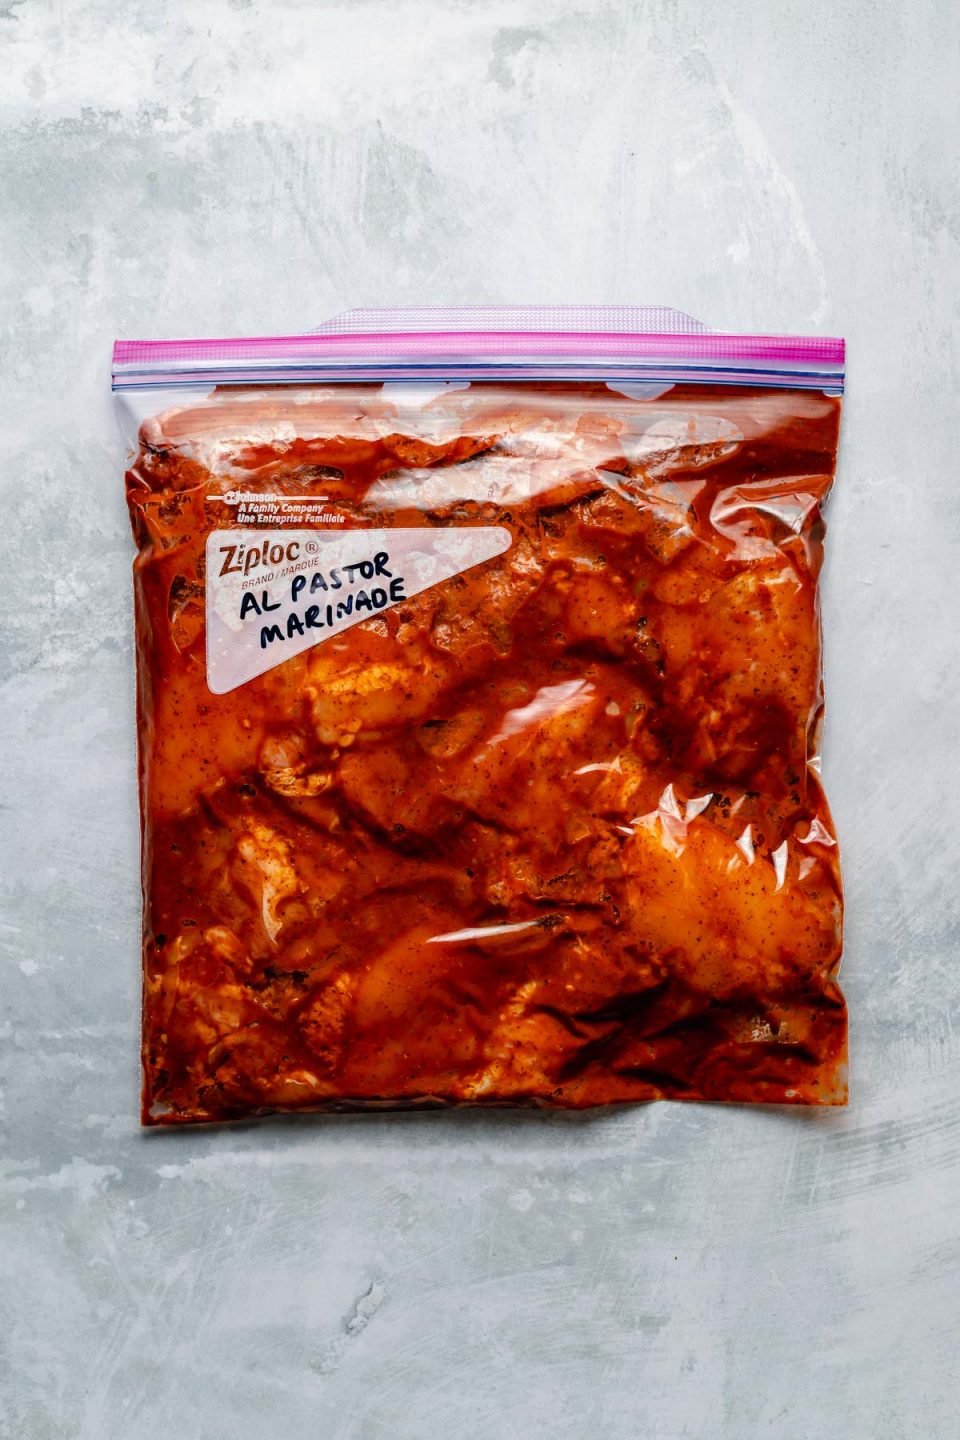 Chicken thighs in a Ziploc bag, marinating in al Pastor marinade. The bag sits atop a light blue surface. “Al Pastor Marinade" is penned in the bag's memo area.